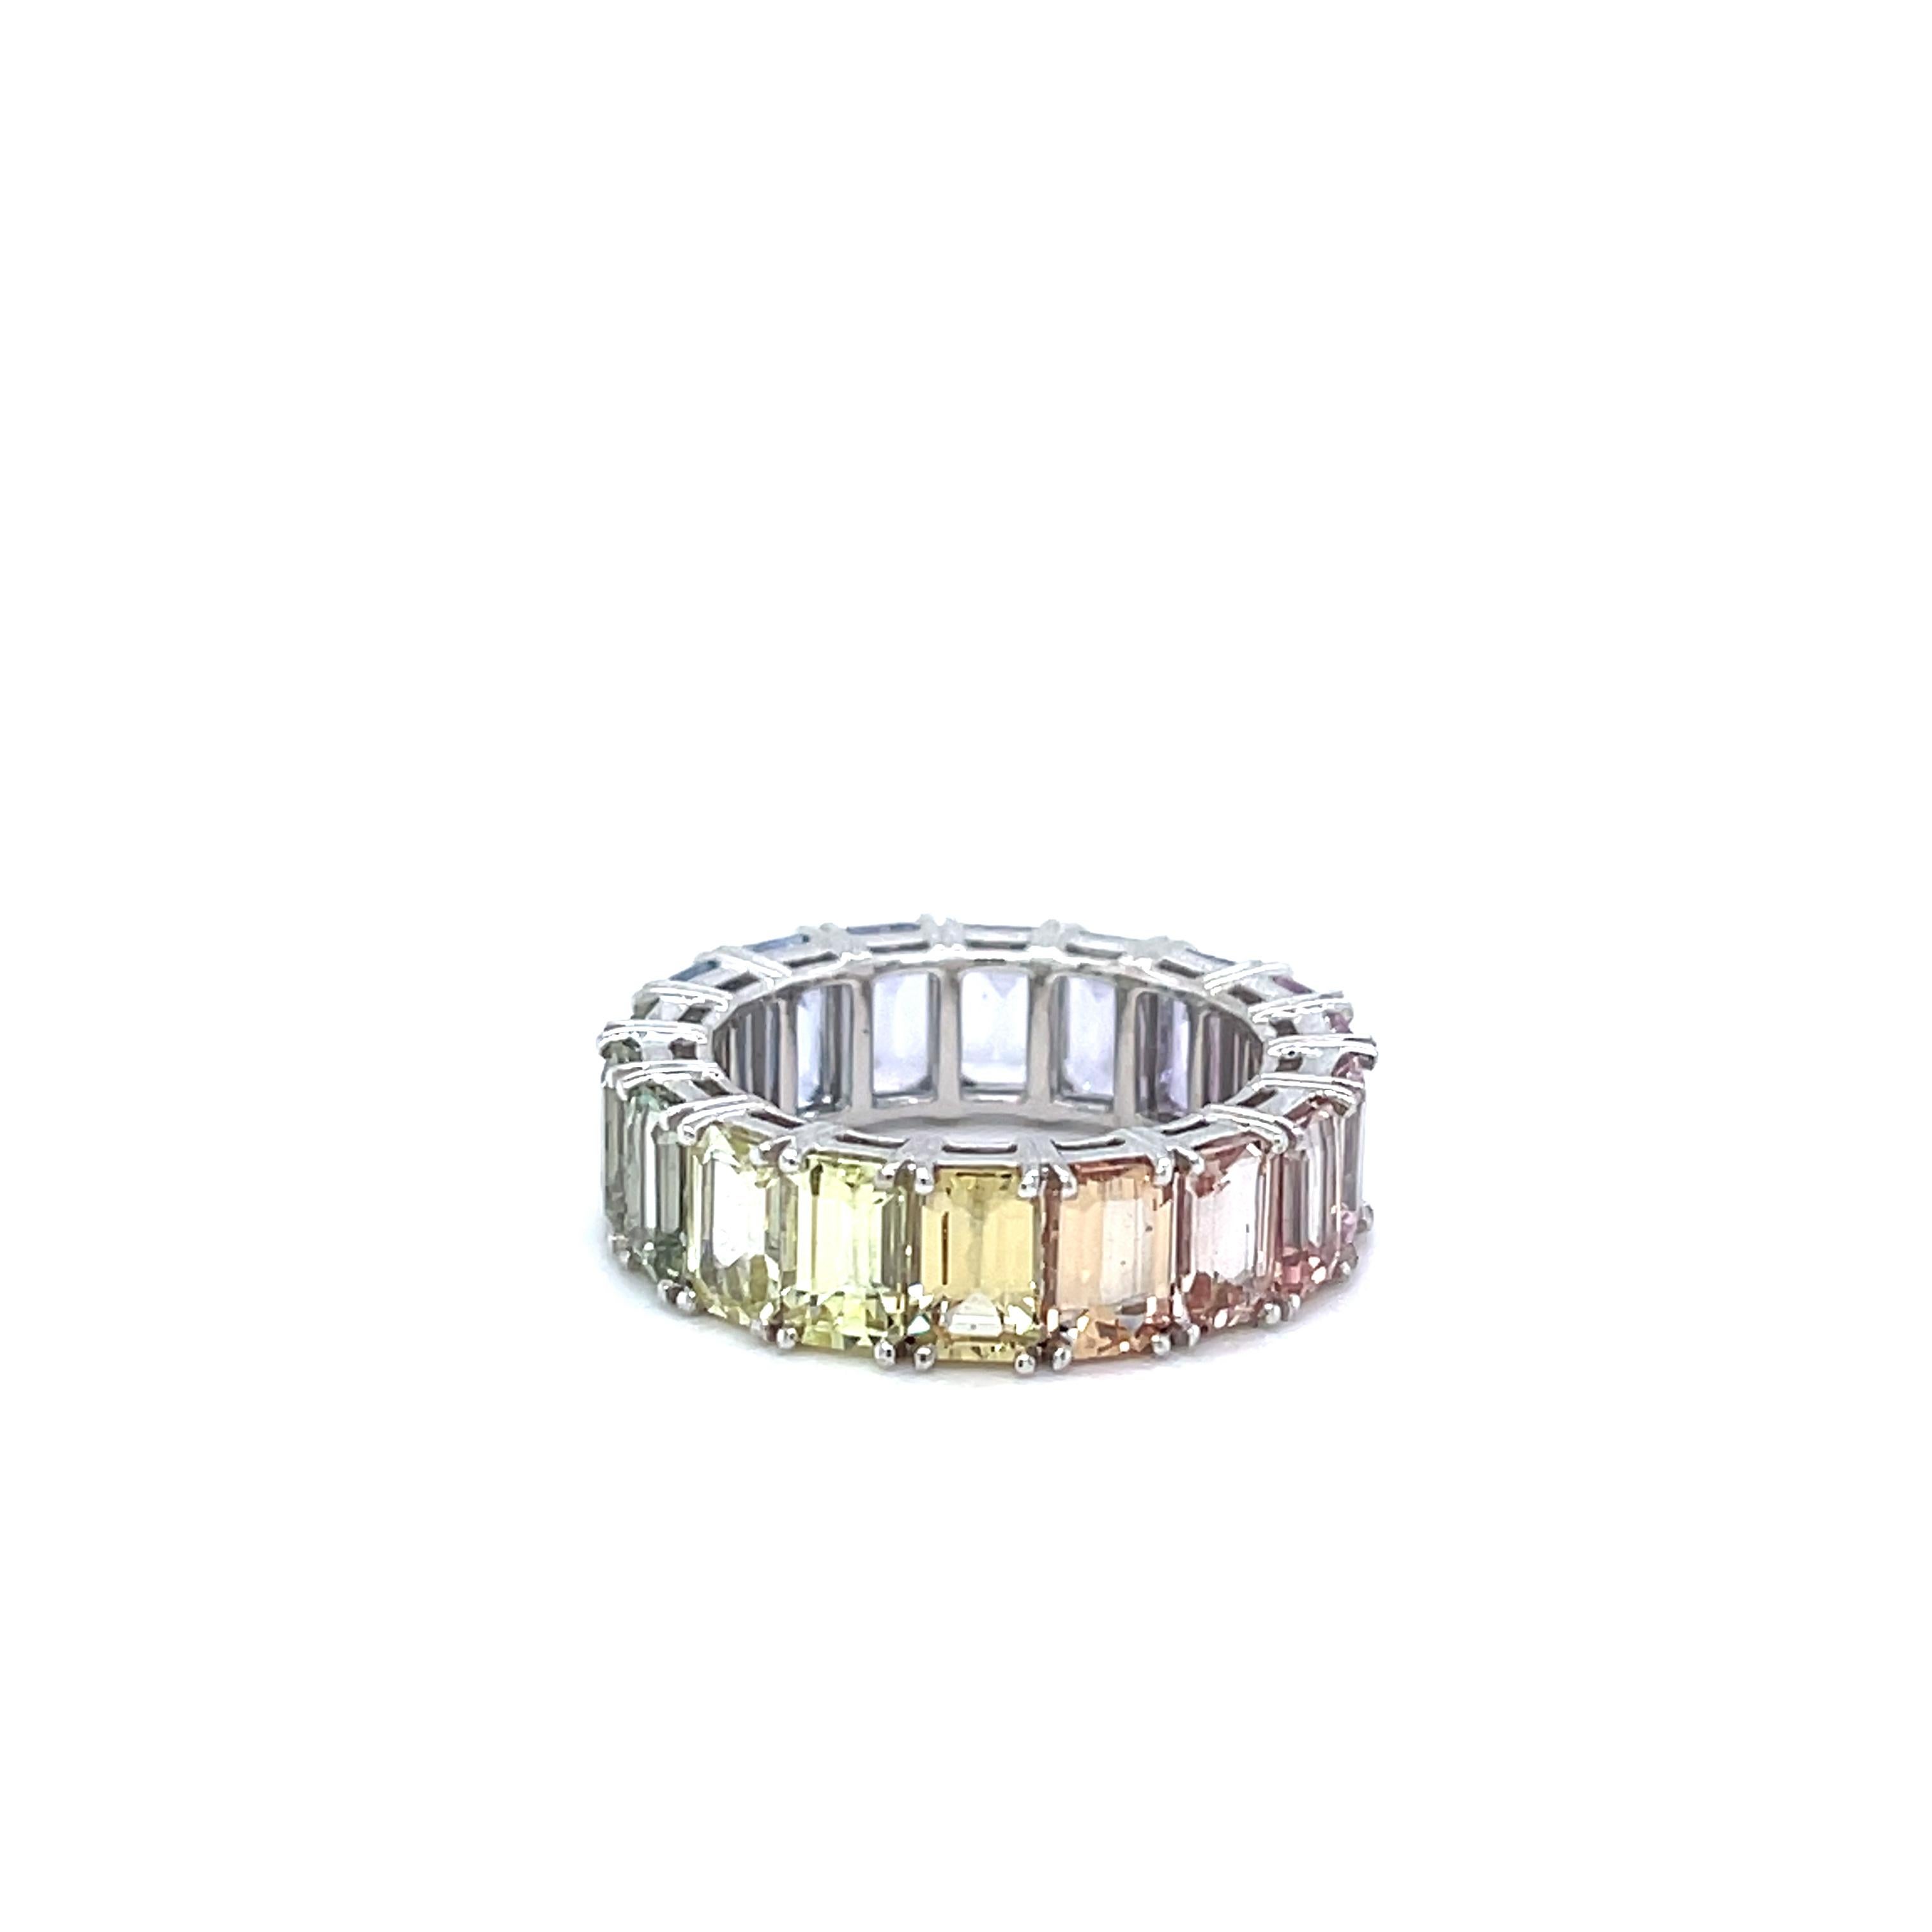 Unleash the Magic of Color with a Rainbow Sapphire Eternity Ring (7.75ct)

Celebrate individuality and vibrant beauty with this captivating rainbow sapphire eternity ring. Featuring 18 unheated sapphires totaling 7.75 carats, this ring showcases a